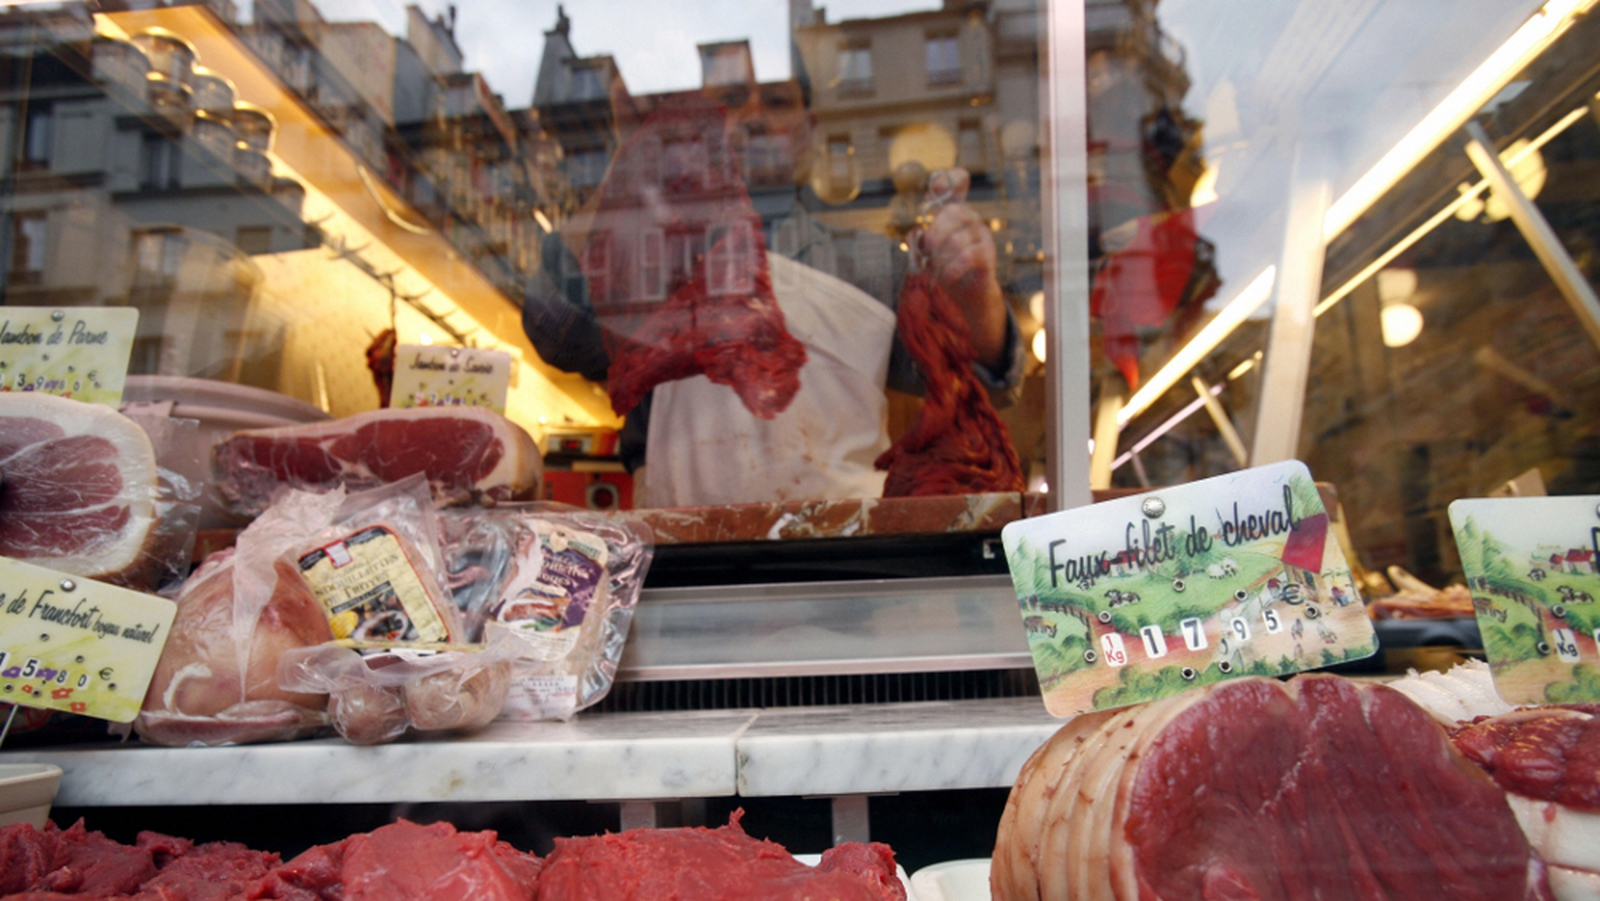 Going to the butcher's shop in France